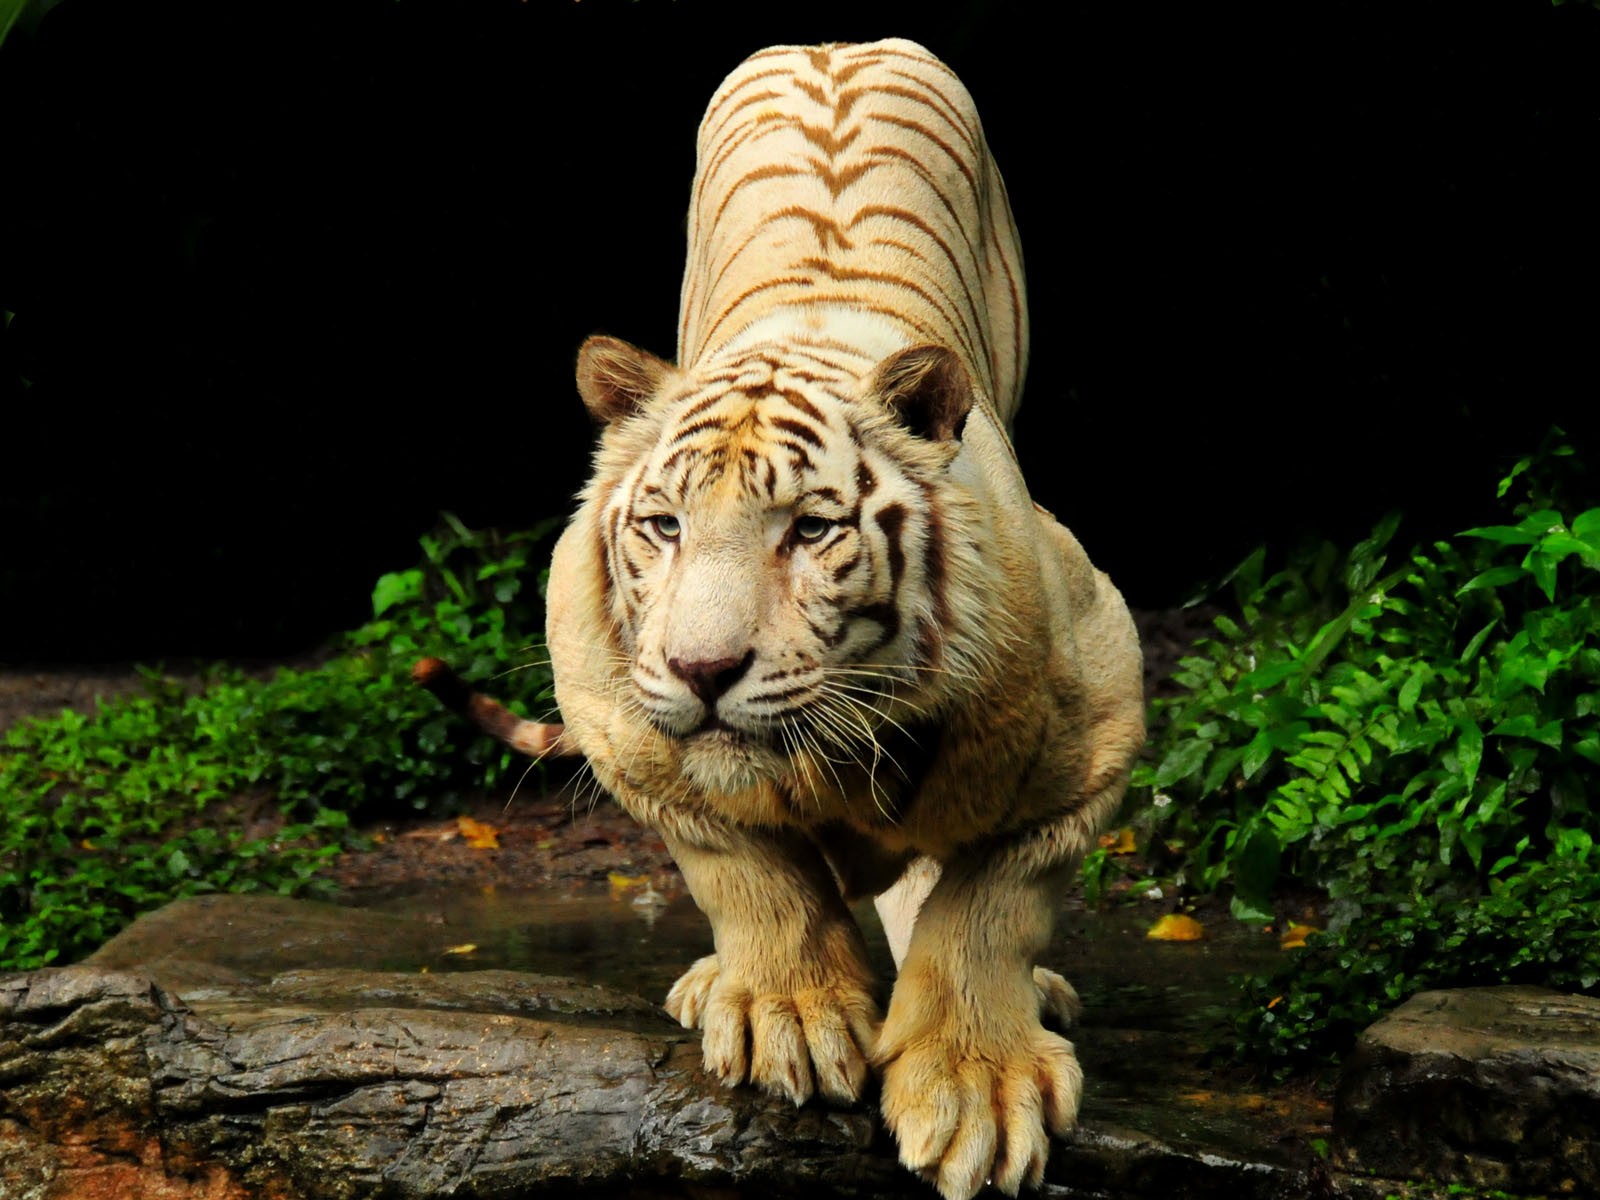 Tiger New HD Wallpaper For Your Laptop Screen Wallapers